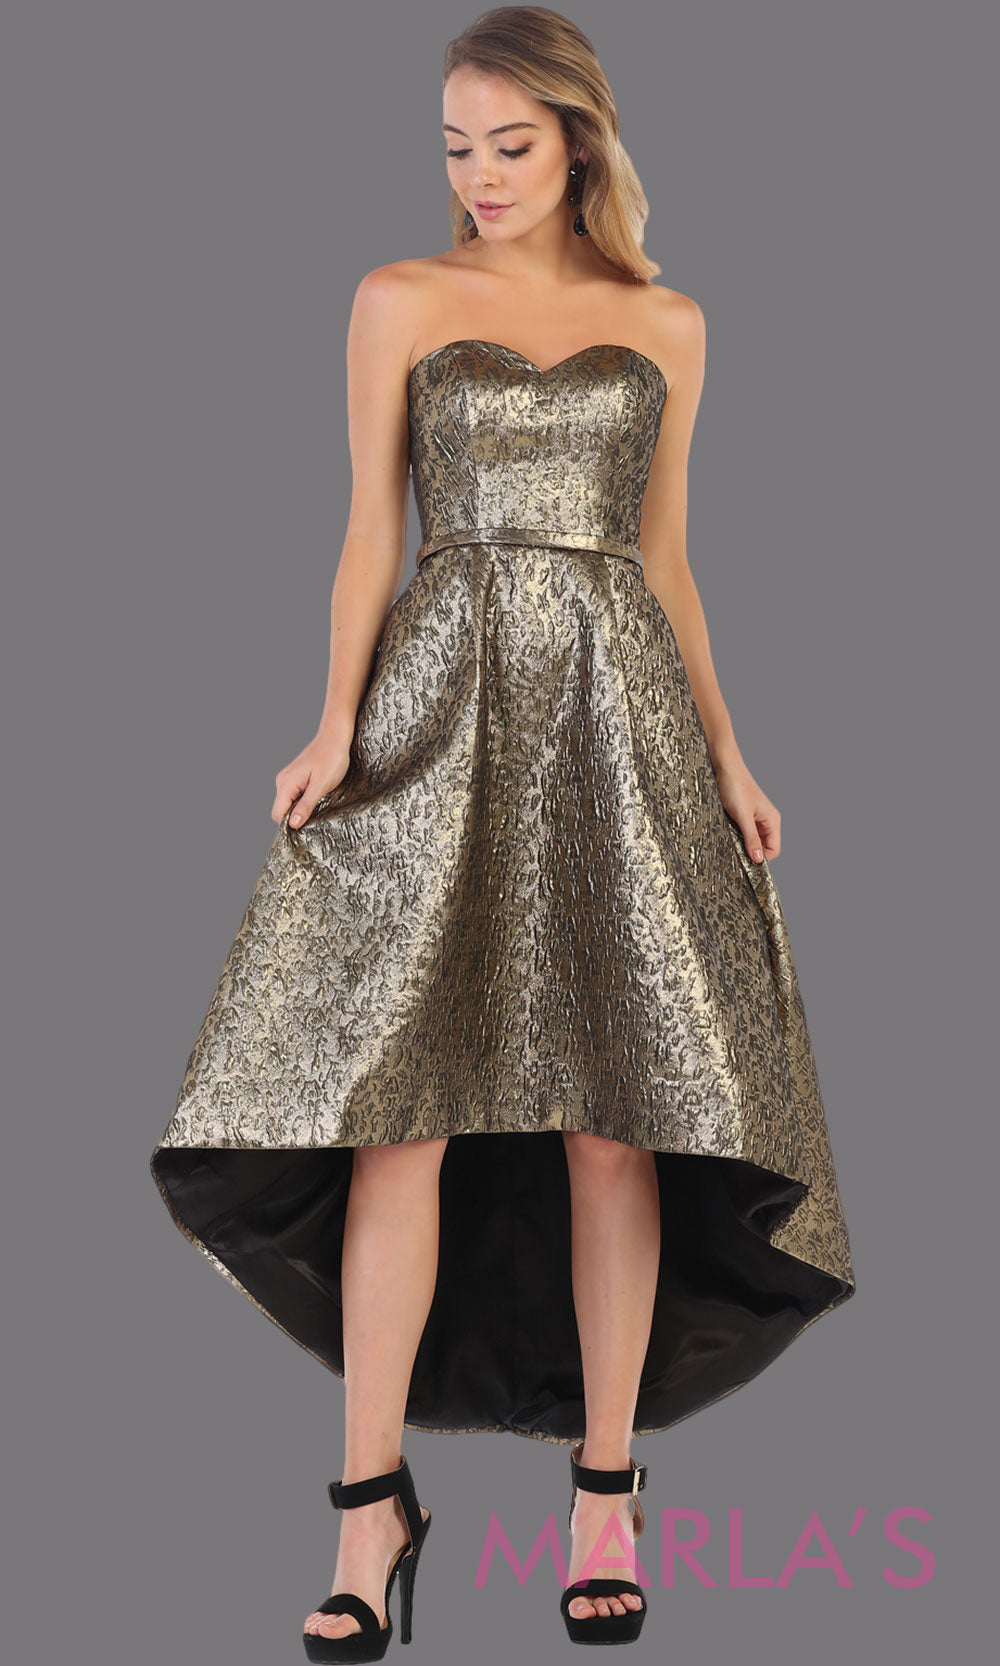 Strapless high low gold metallic semi formal party dress from MayQueen RQ7702. This hi lo party dress is perfect prom, grade 8 graduation, plus size wedding guest dresses, gala, formal evening party, graduationgrade 8 grad dresses, graduation dresses